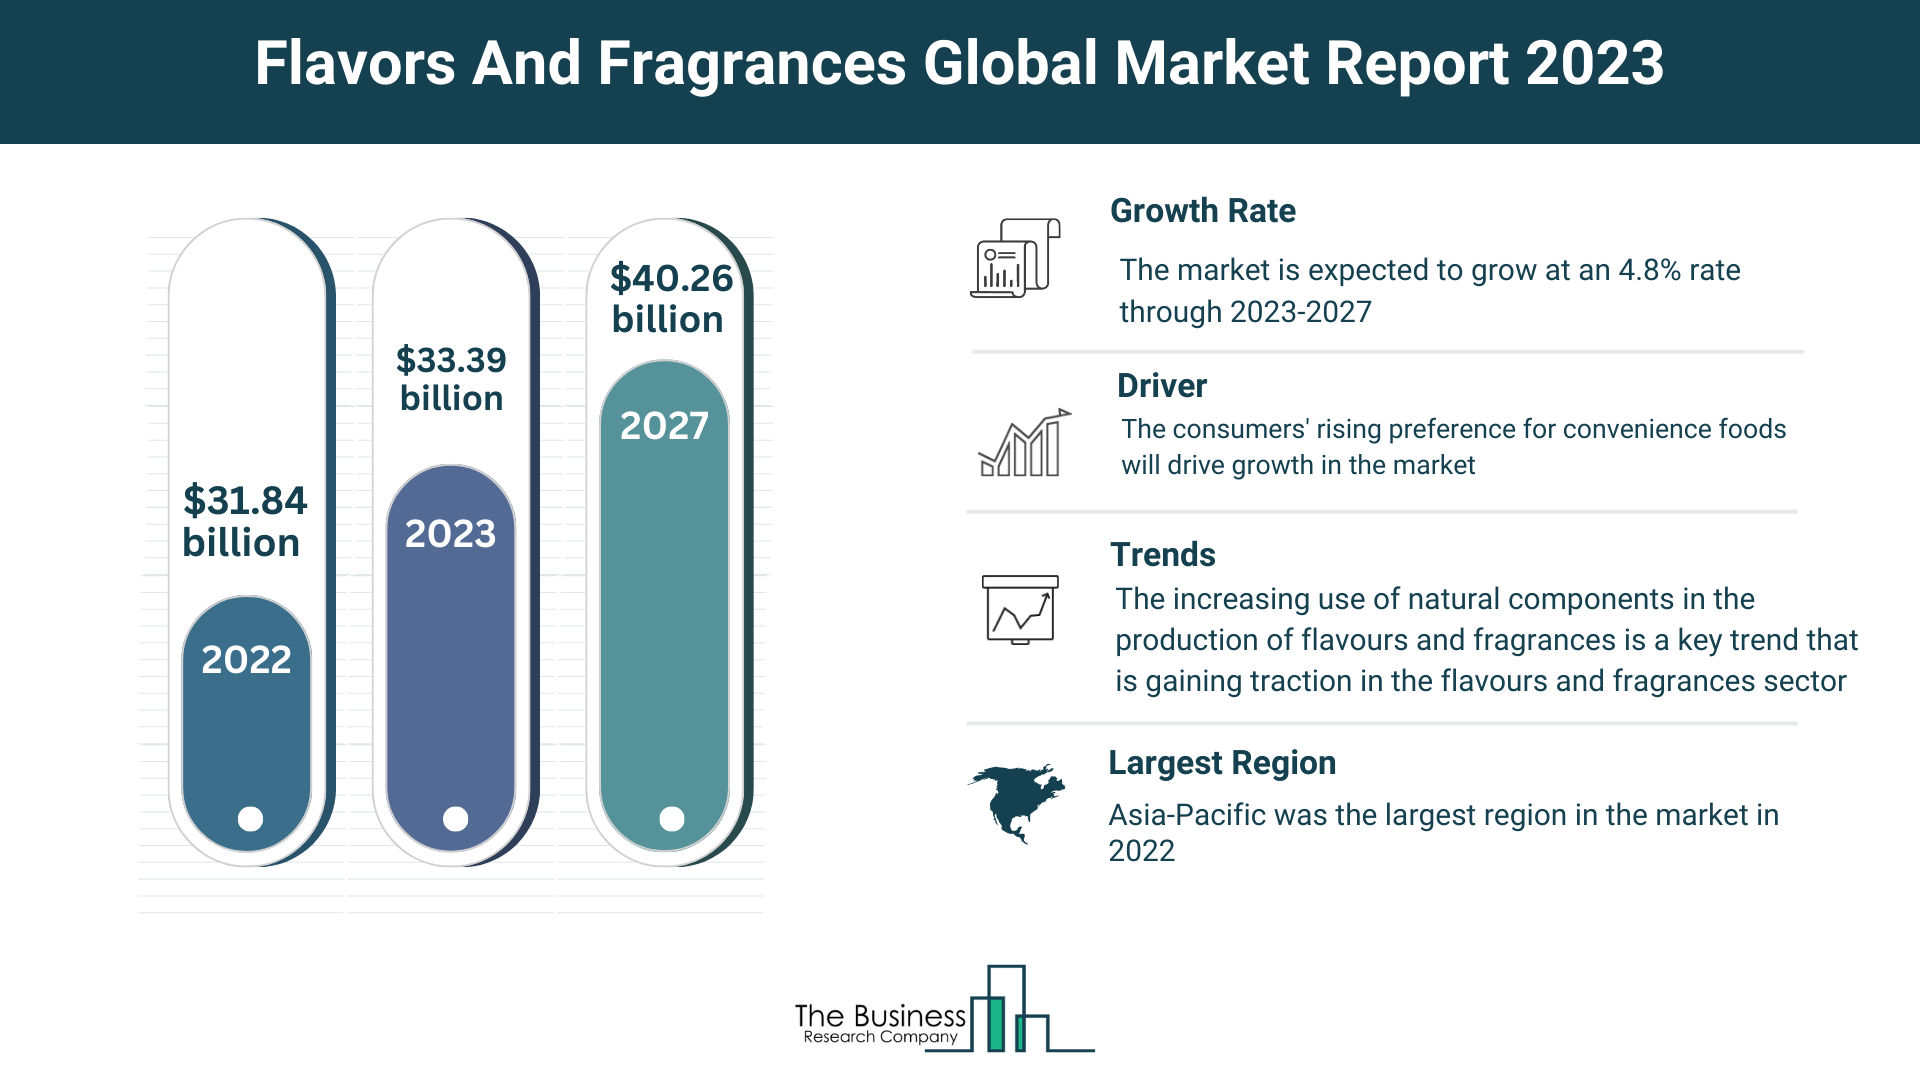 What Are The 5 Top Insights From The Flavors And Fragrances Market Forecast 2023